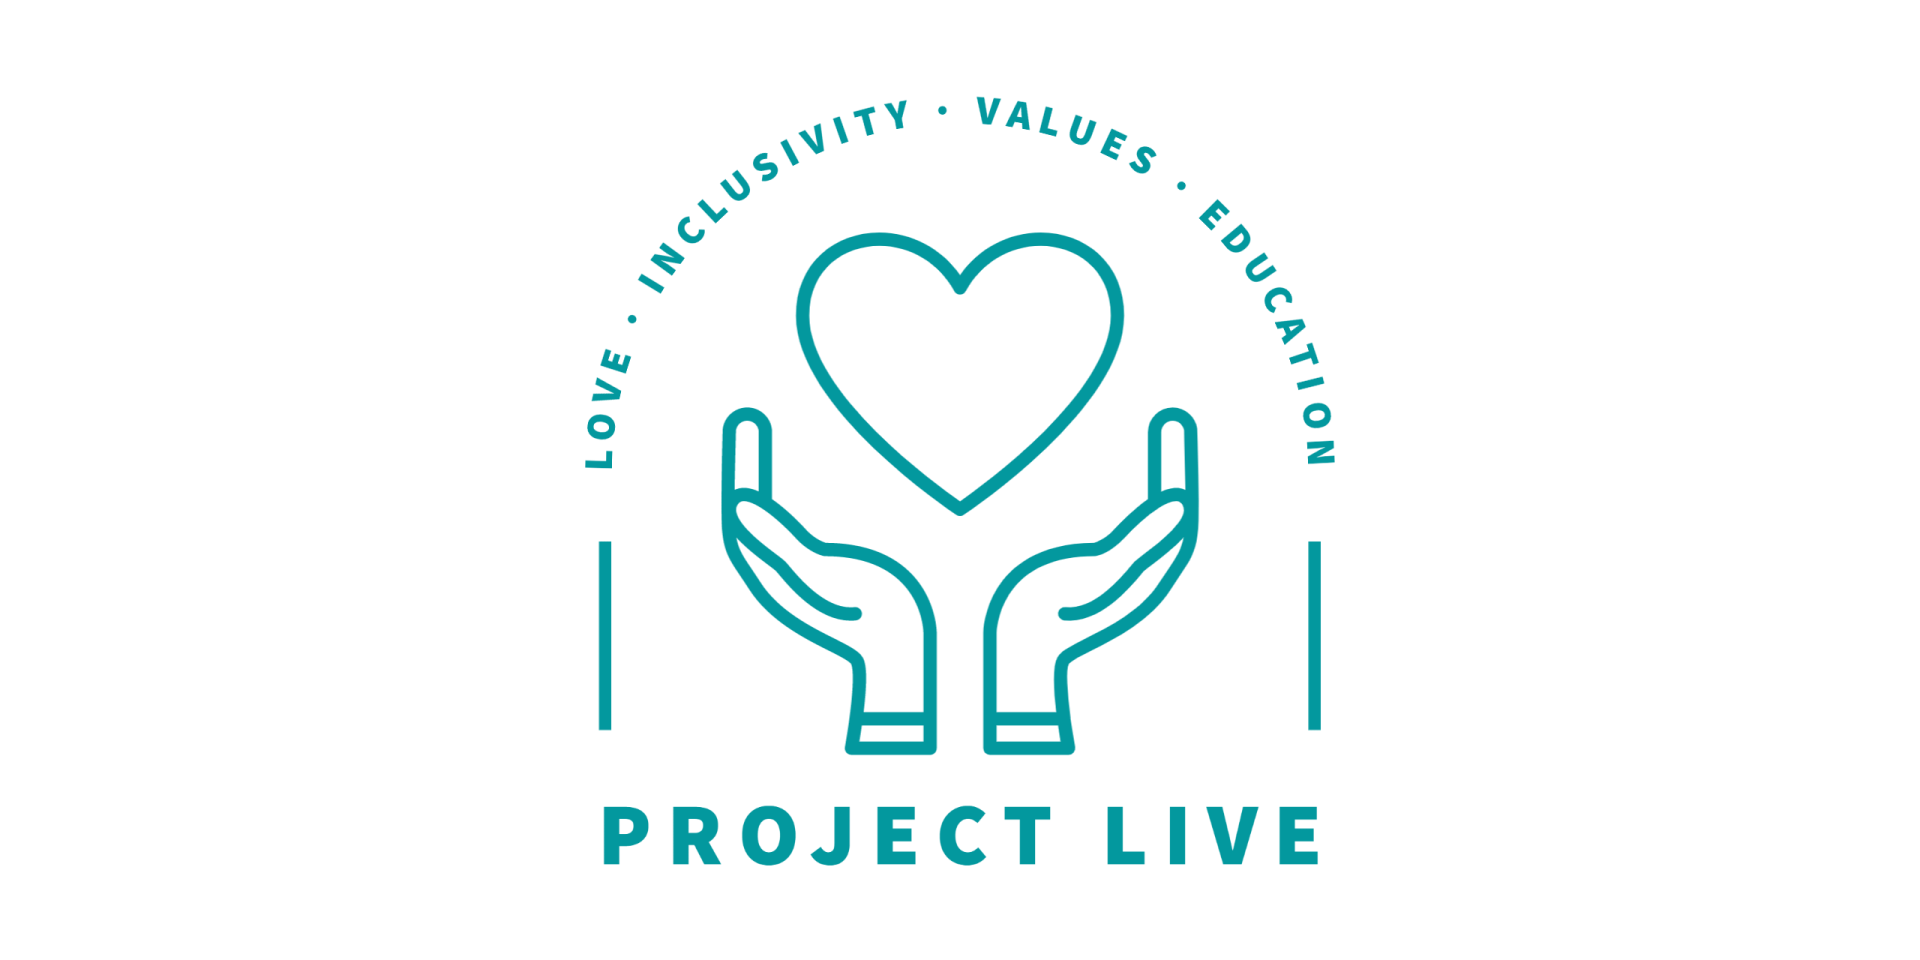 Project LIVE